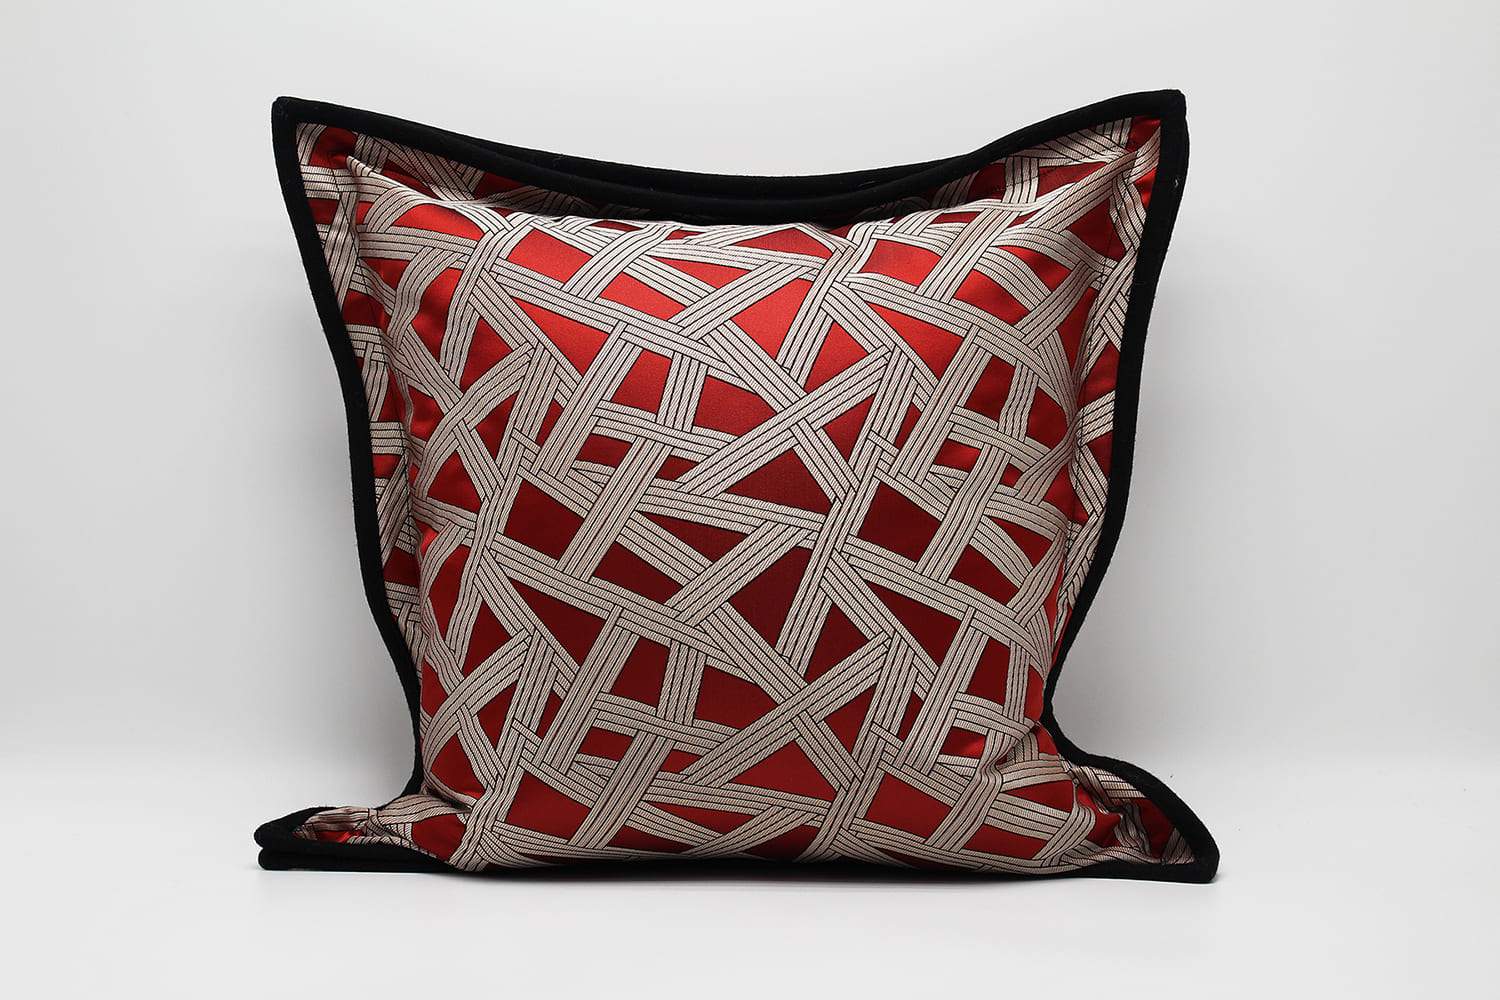 CUDDLE BEAUTIFUL RED PILLOWS & CUSHION- ANGIE HOMES ANGIE HOMES